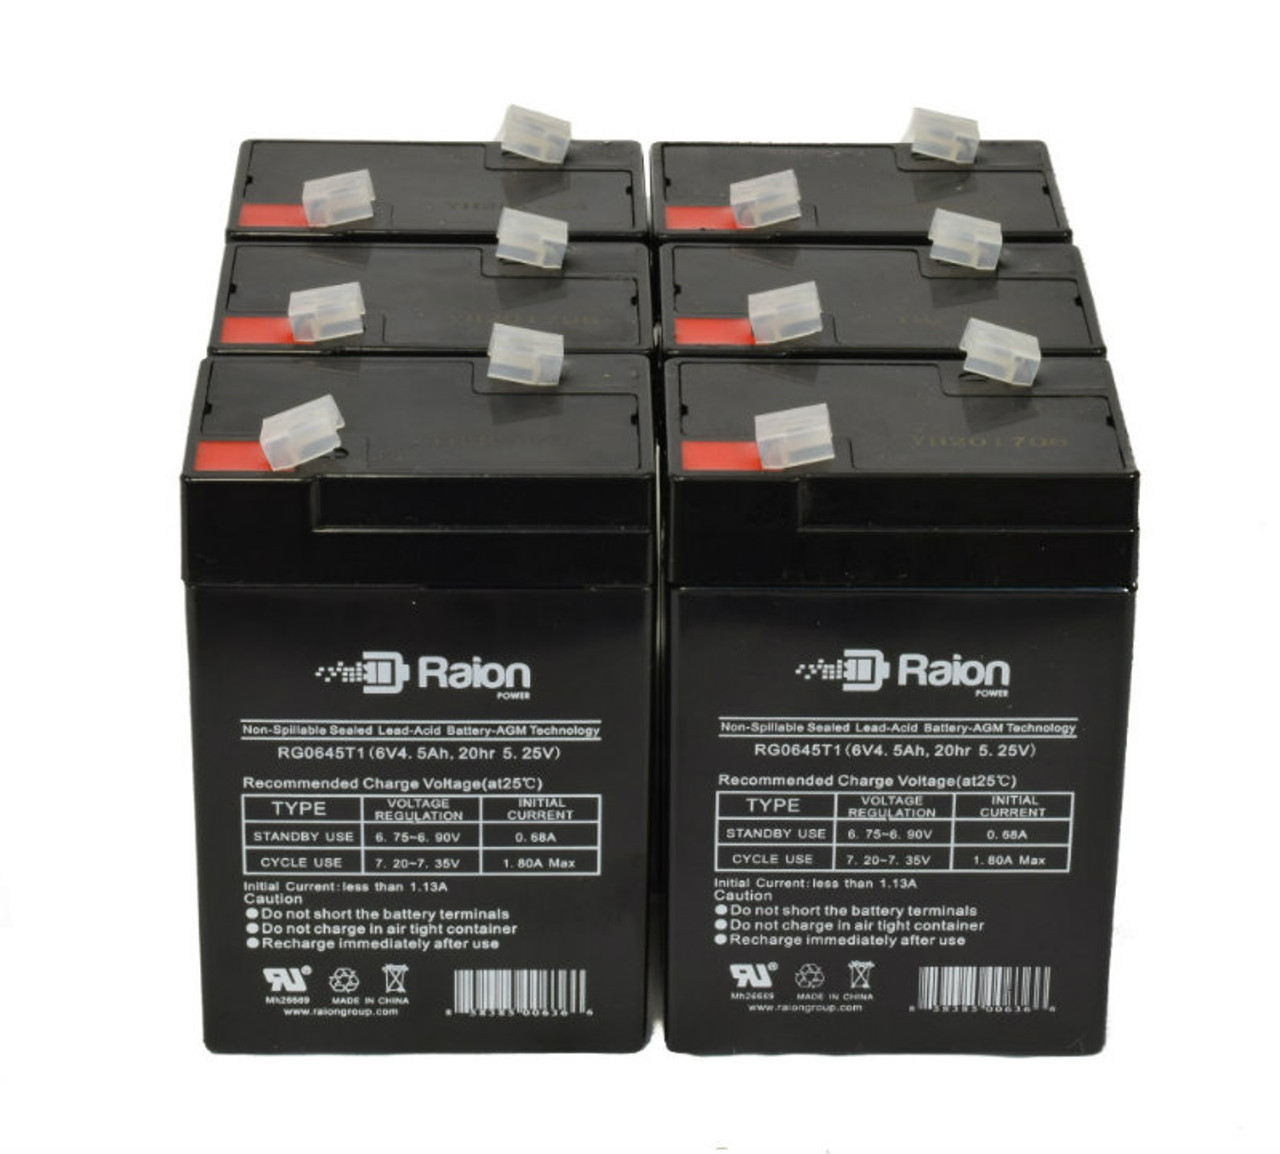 Raion Power 6 Volt 4.5Ah RG0645T1 Replacement Battery for BB BC4.5-6 - 6 Pack